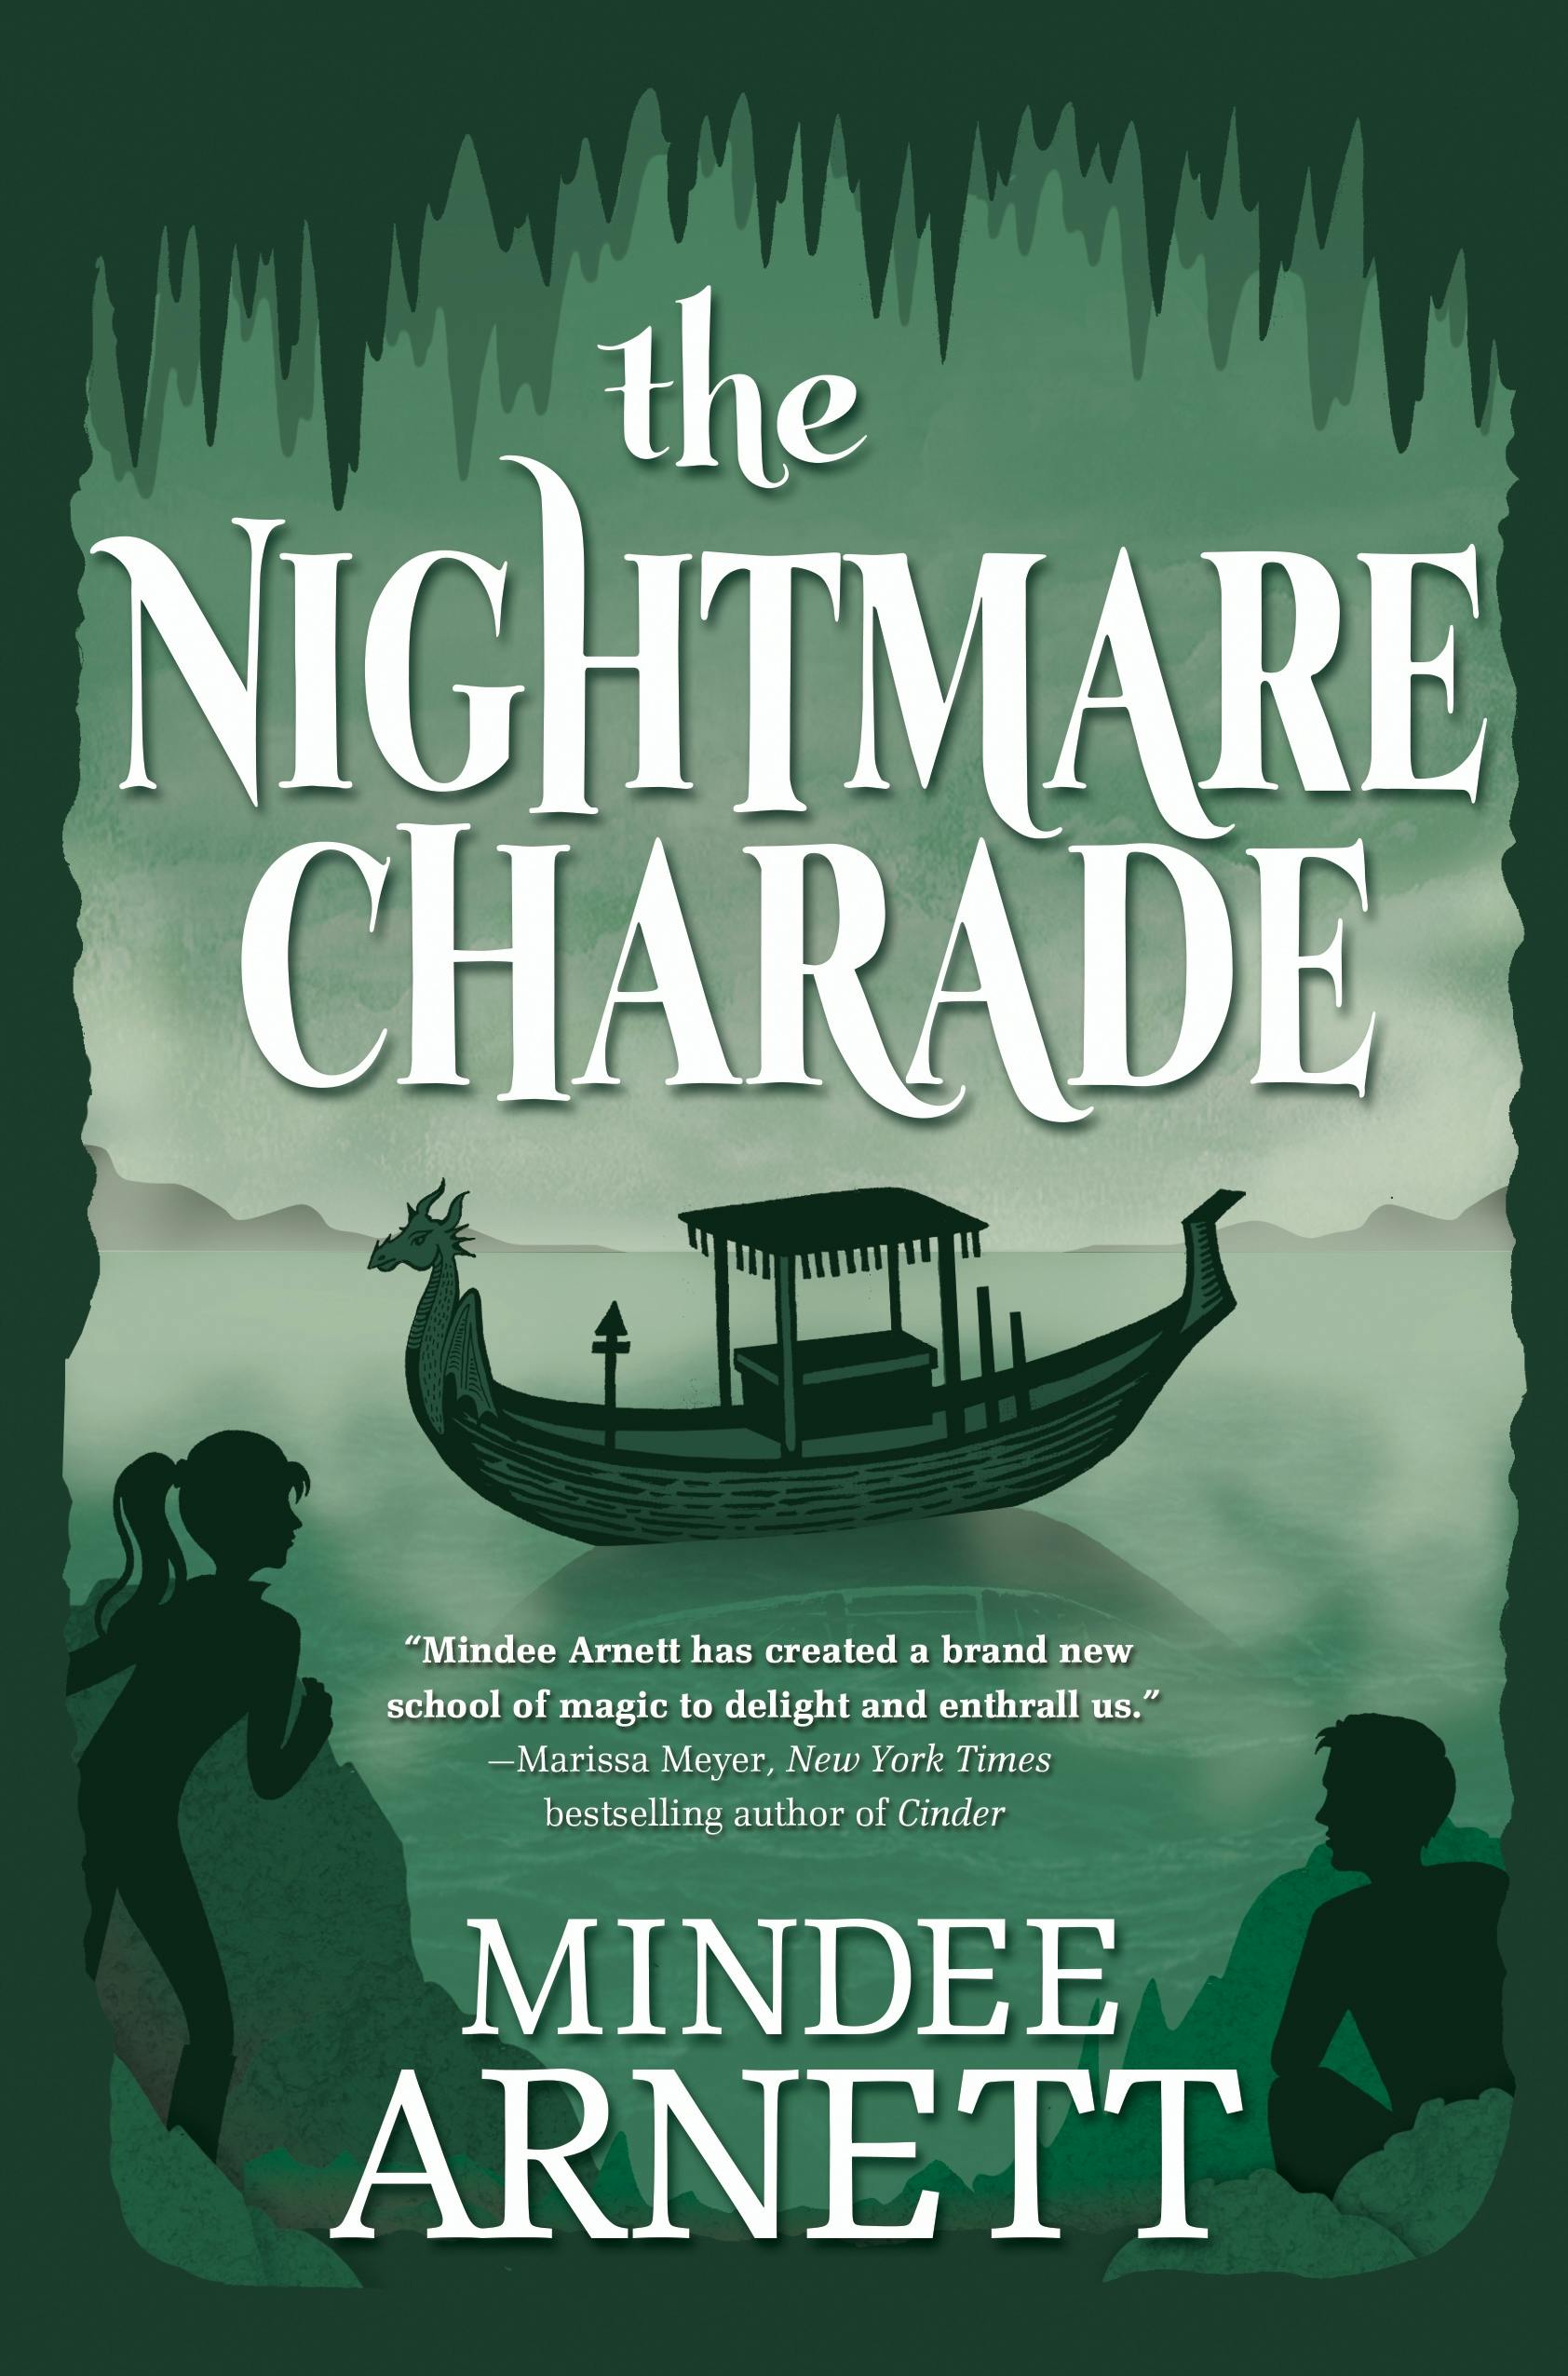 Cover for the book titled as: The Nightmare Charade